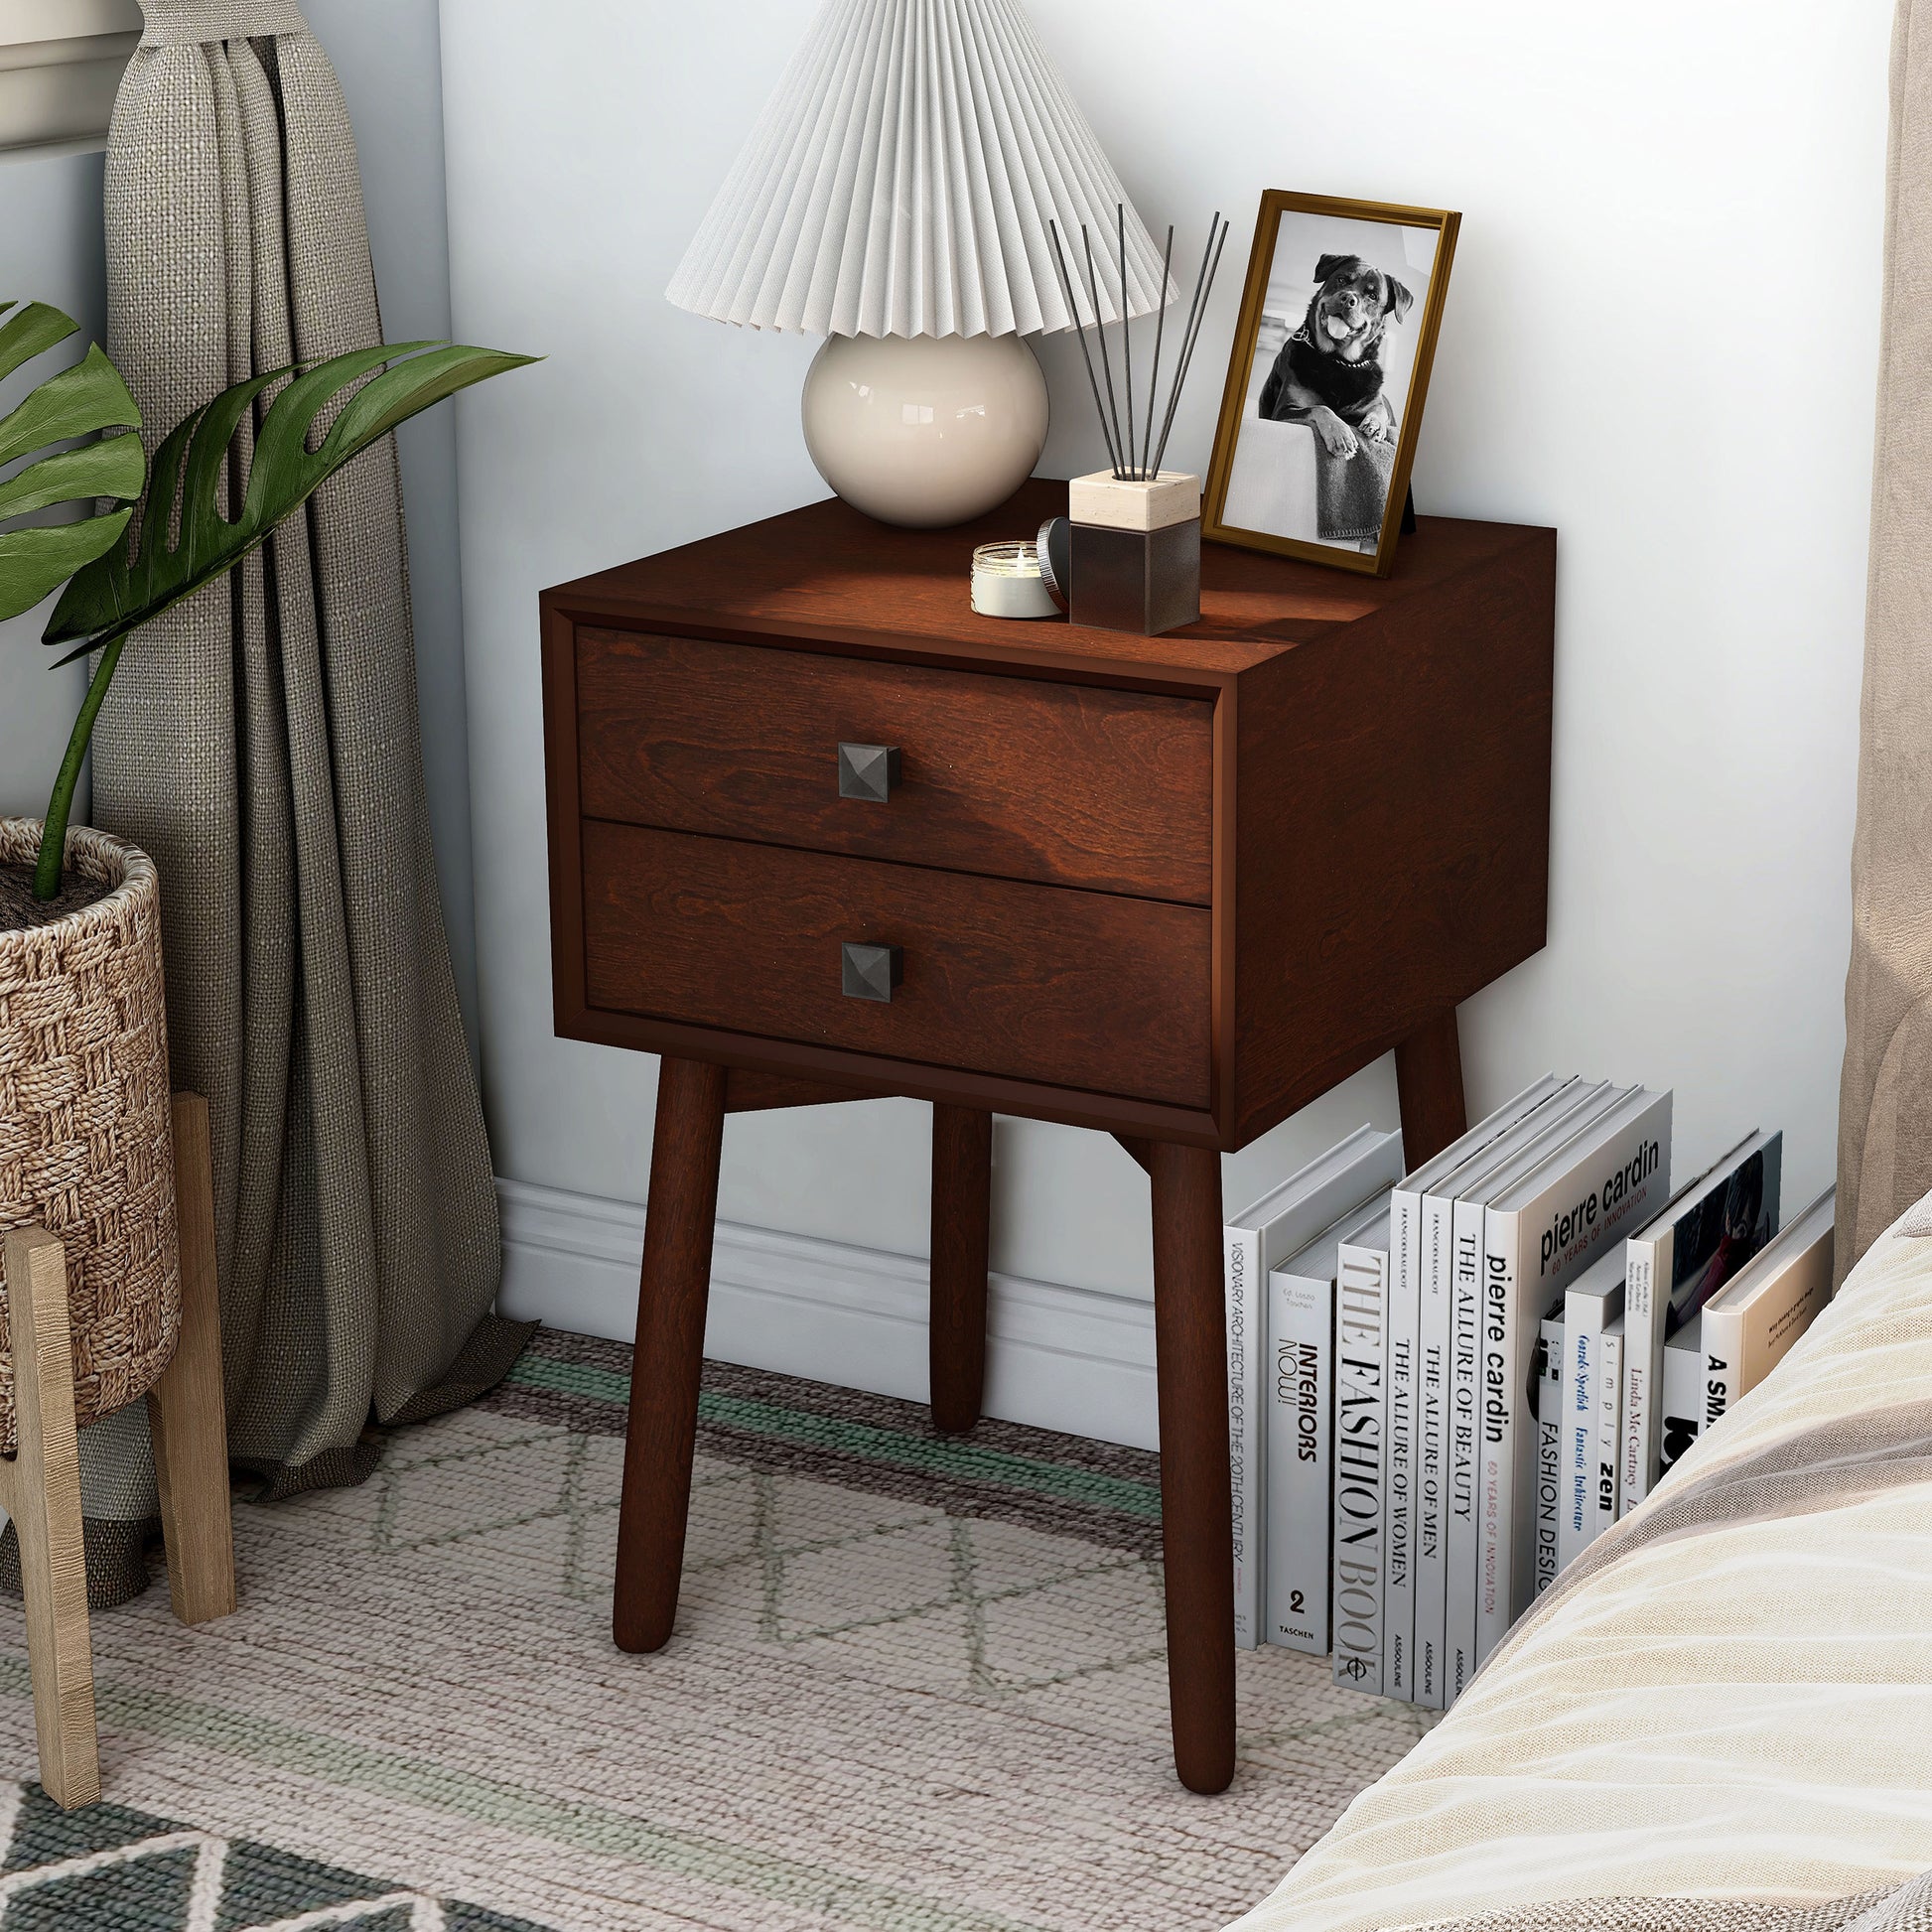 Left angled modern espresso two-drawer compact nightstand with splayed legs in a bedroom with accessories